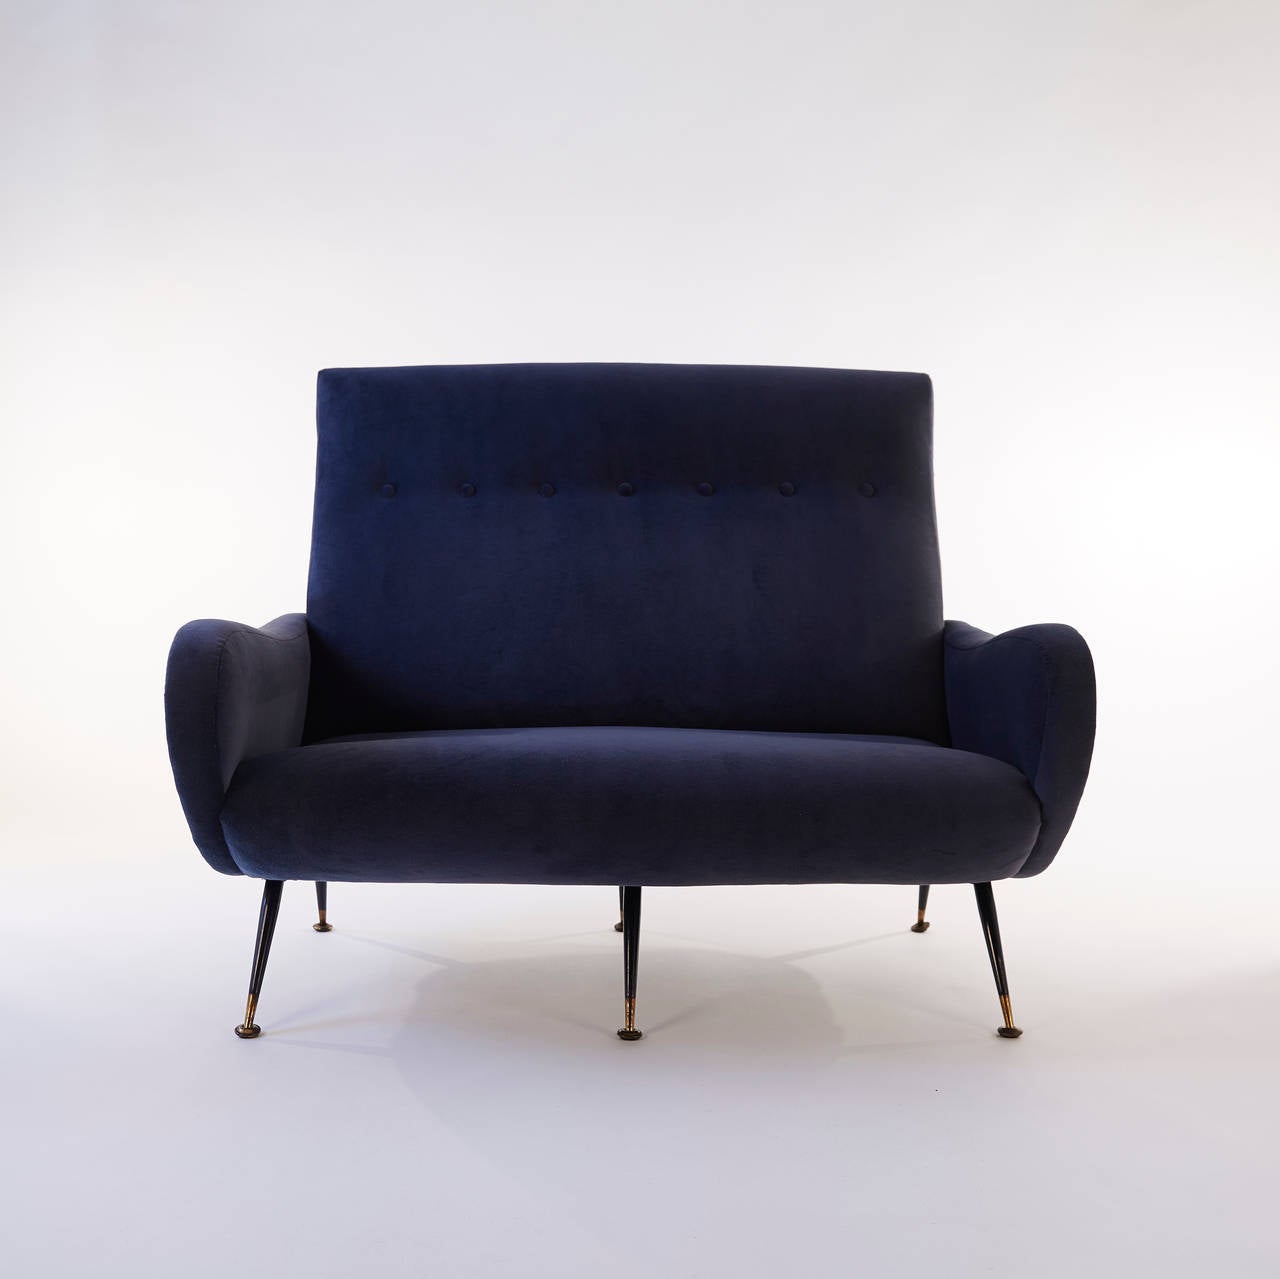 Beautiful settee in the style of Marco Zanuso reupholstered in a deep blue cotton velvet.